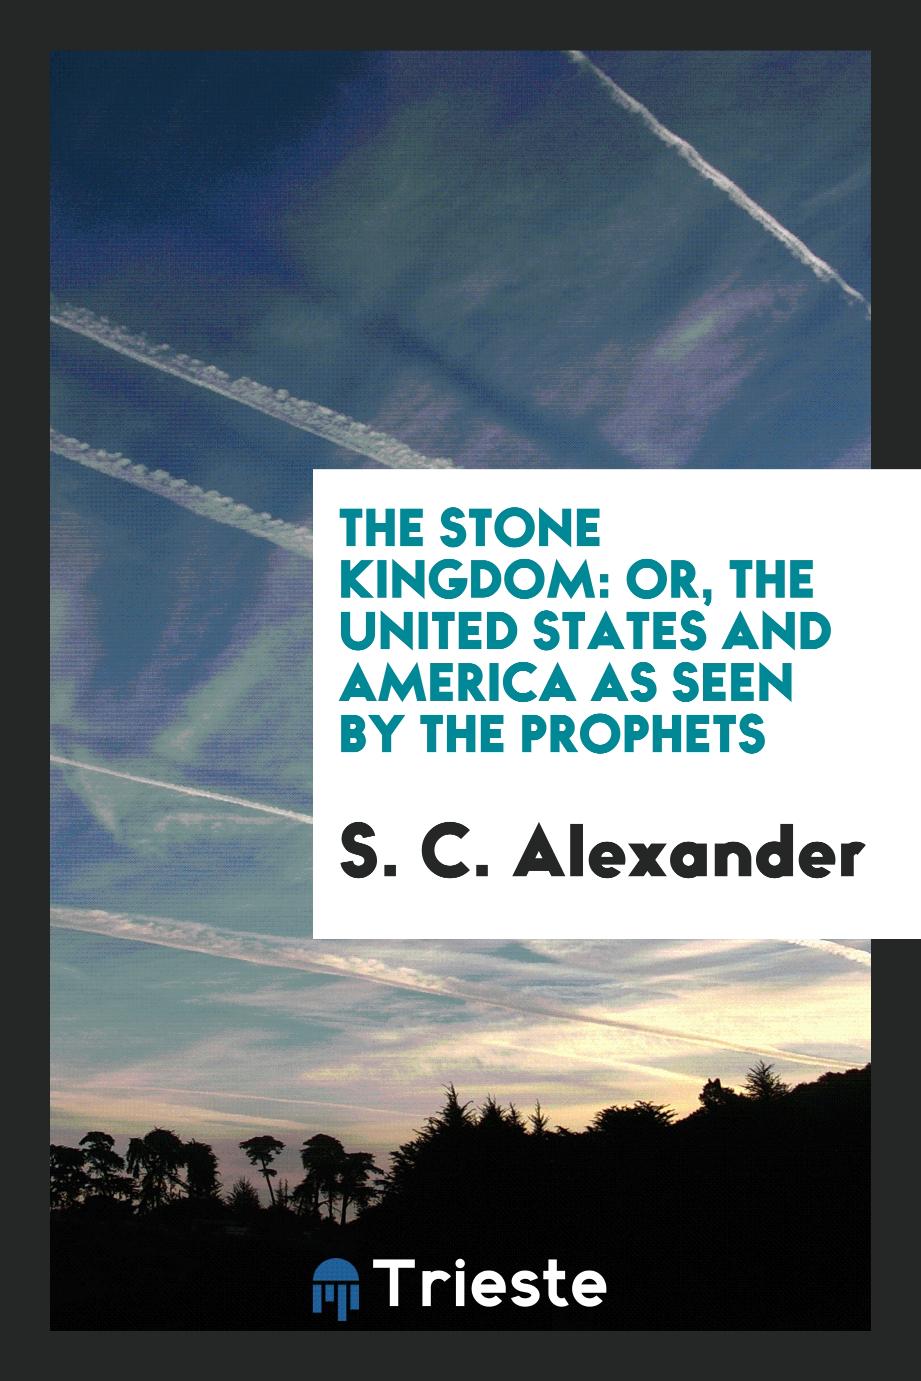 The stone kingdom: or, The United States and America as seen by the prophets